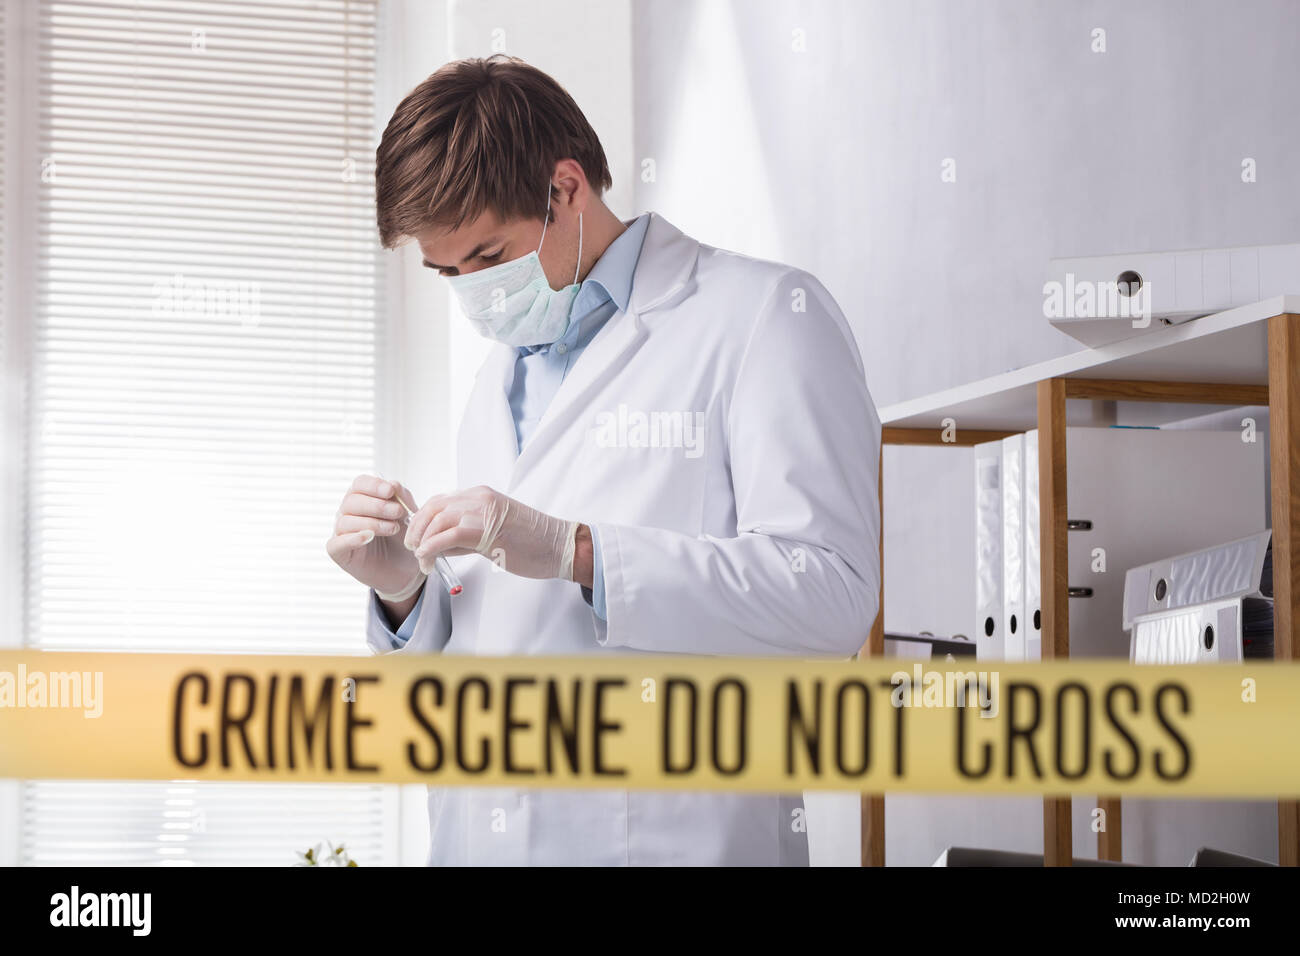 Crime Scene Do Not Cross Tape In Front Of Forensic Expert Looking For Evidence Stock Photo